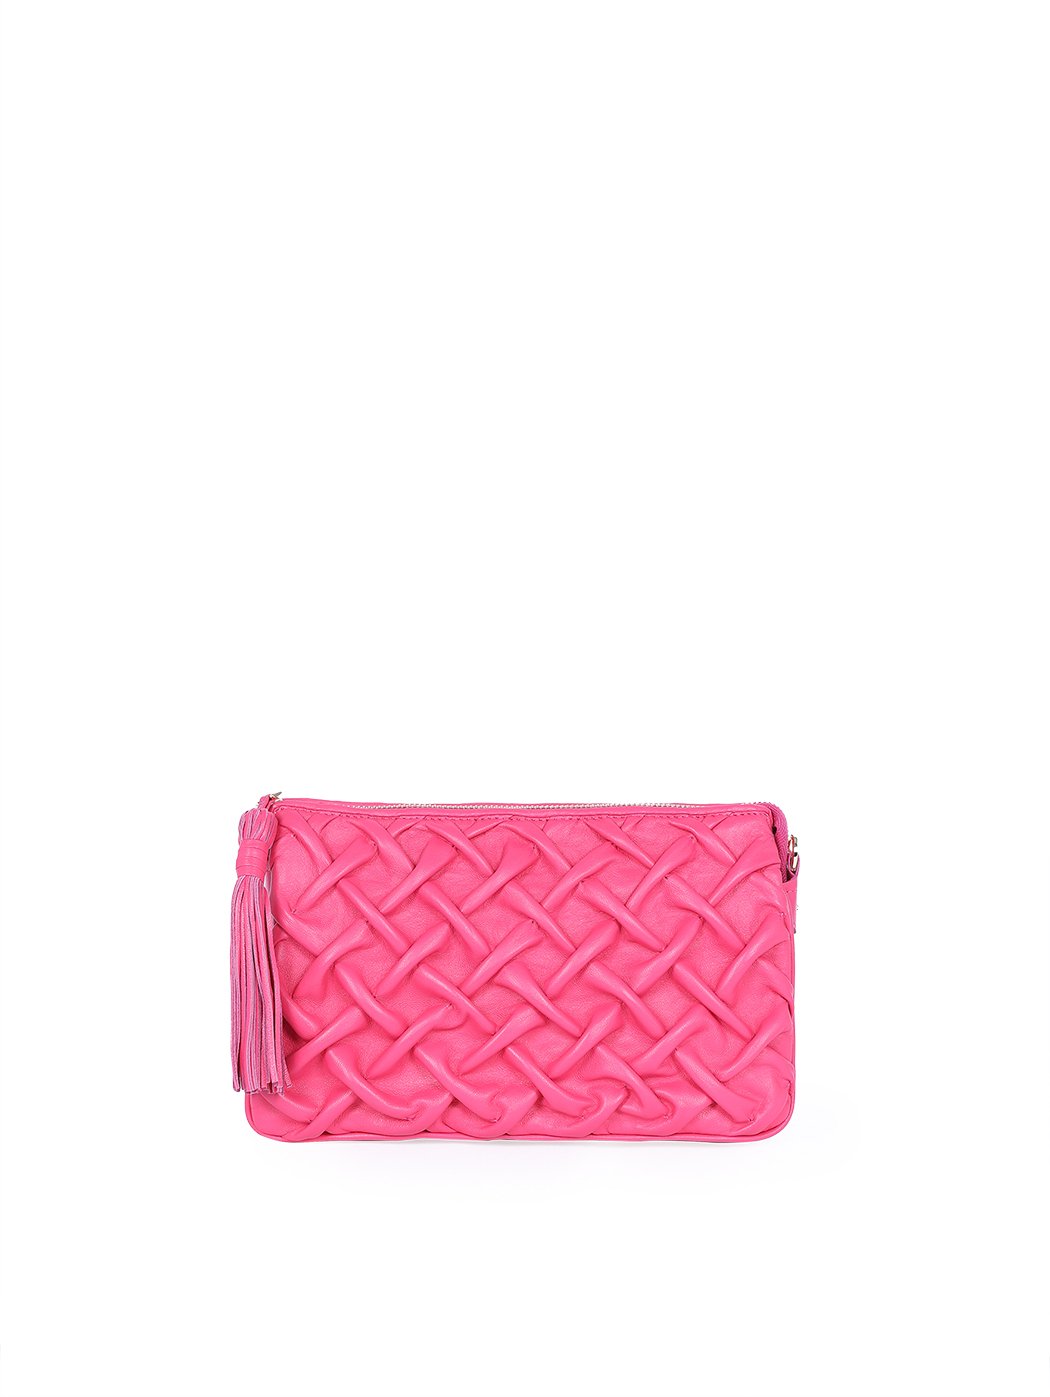 Quilted Weave Leather Accordion Crossbody Bag Fuchsia